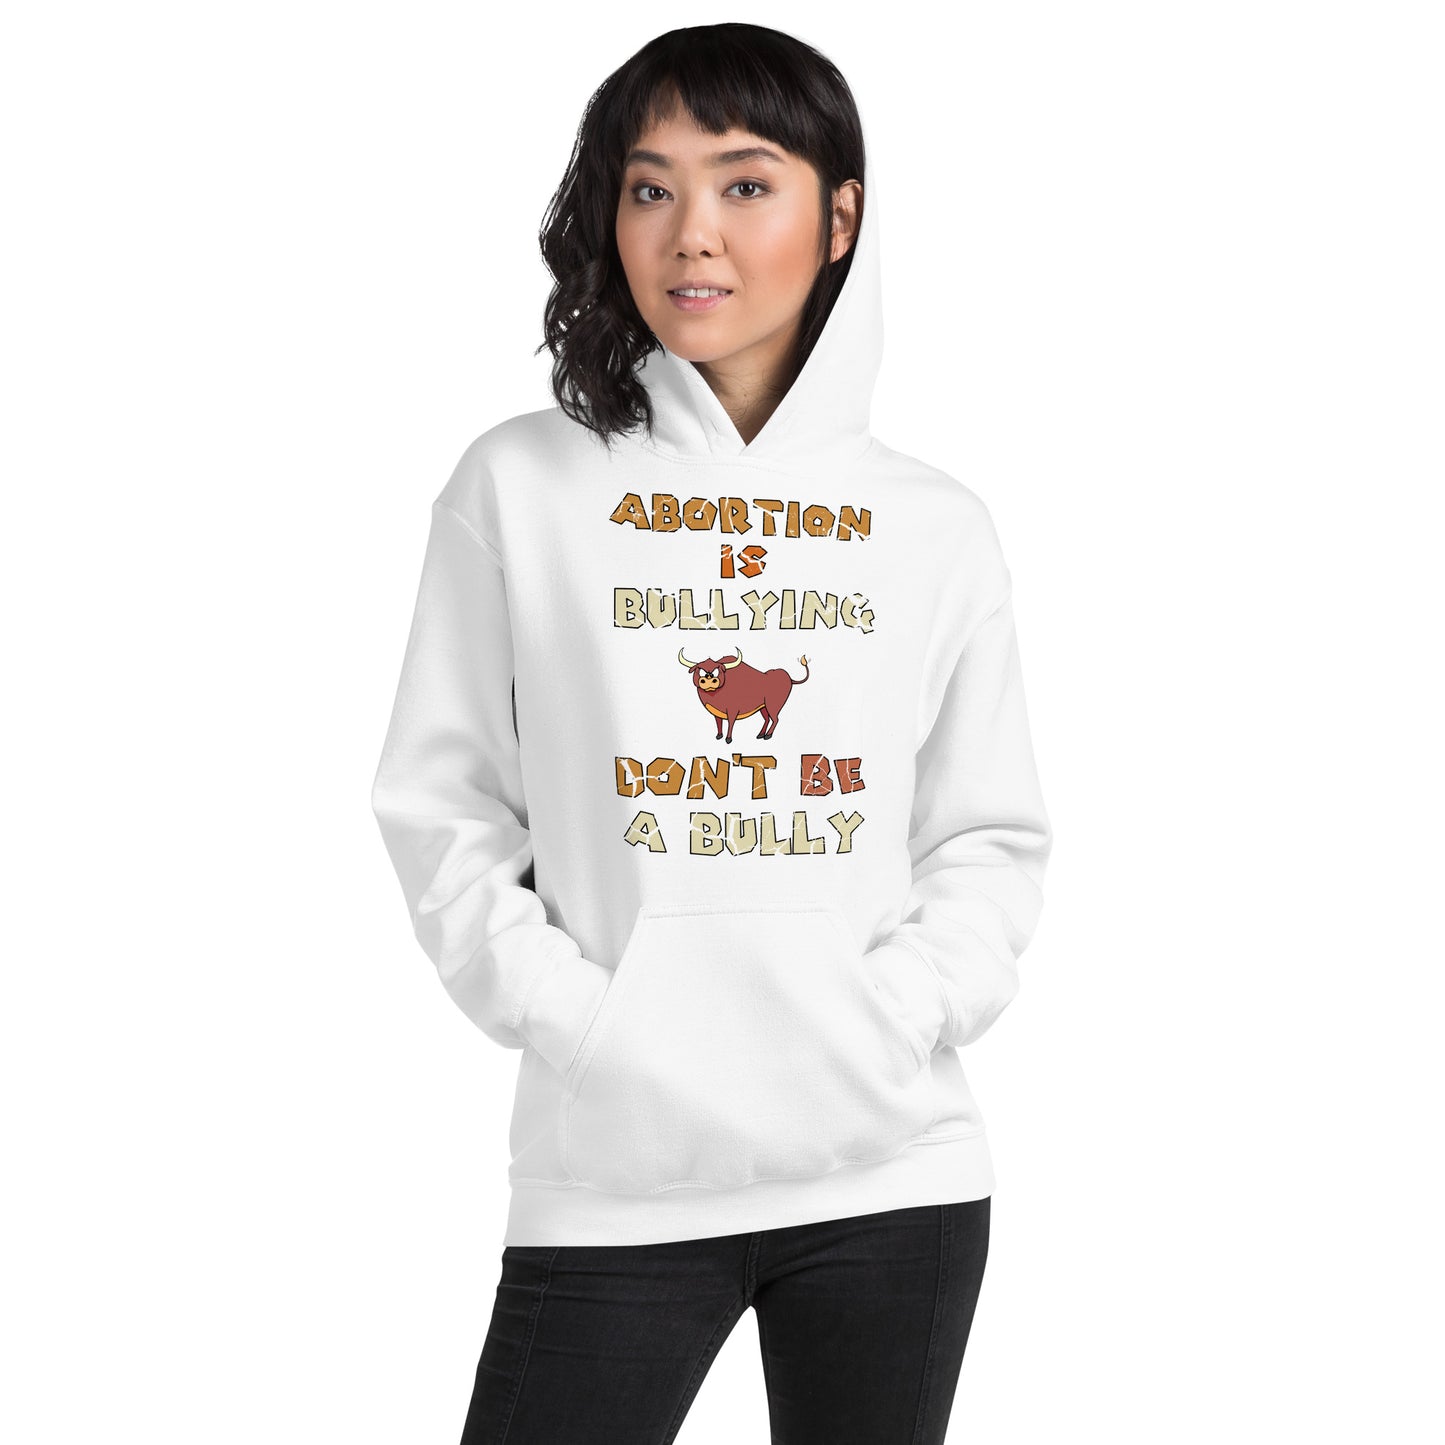 A001 Hoodie – Gildan 18500 Unisex Hoodie Featuring Bull-Steer Graphic with text “Abortion is Bullying. Don’t be a Bully.”